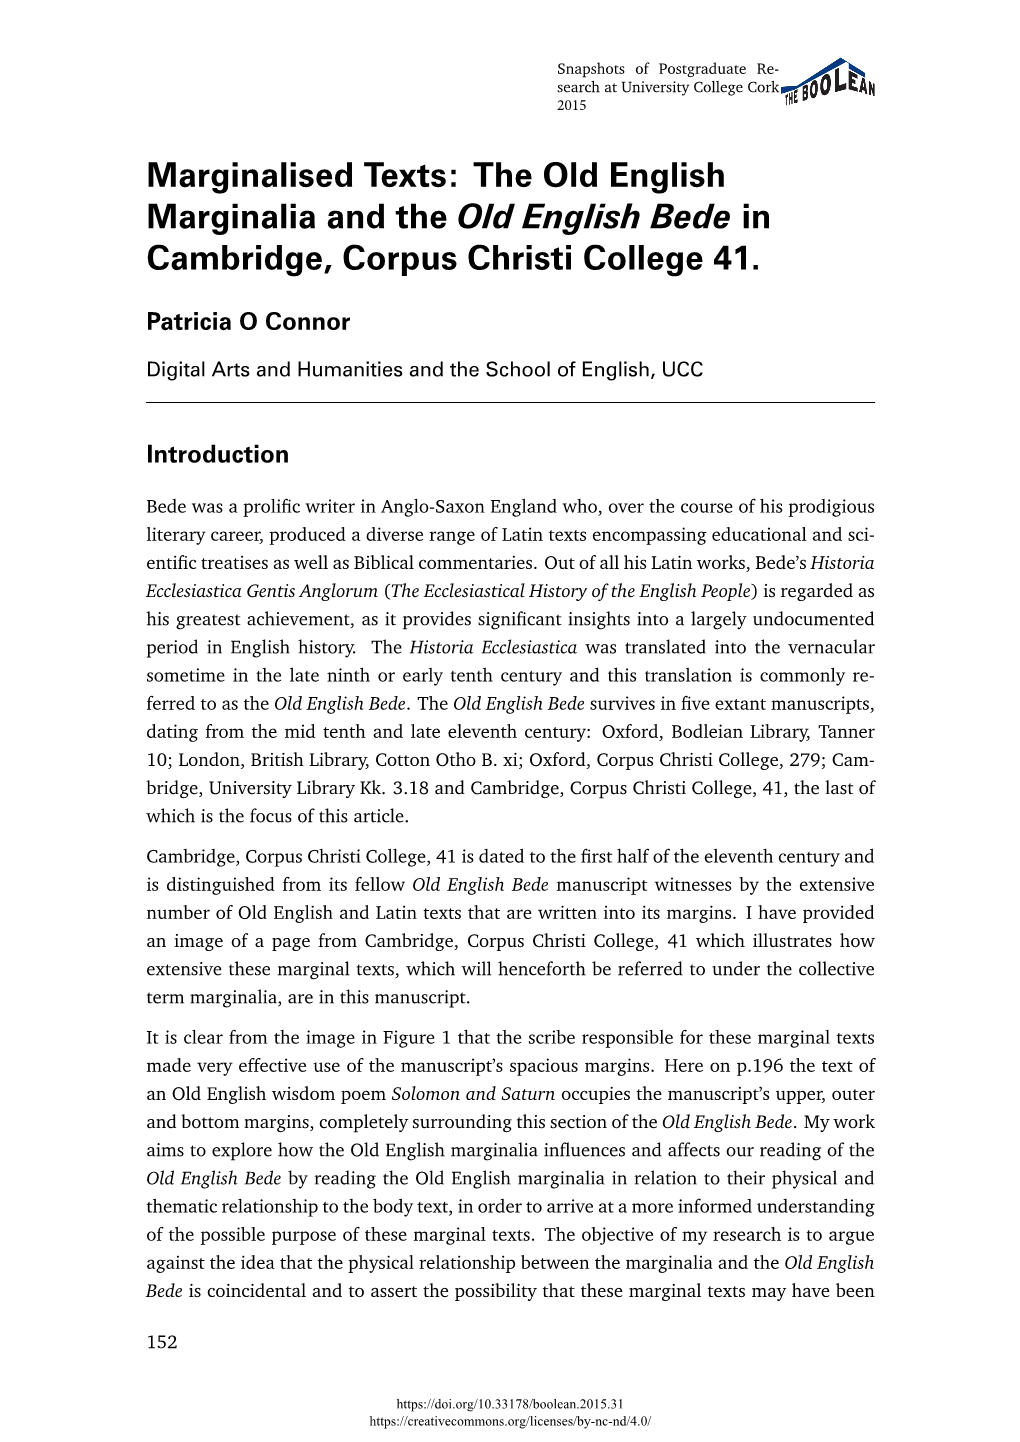 Marginalised Texts: the Old English Marginalia and the Old English Bede in Cambridge, Corpus Christi College 41